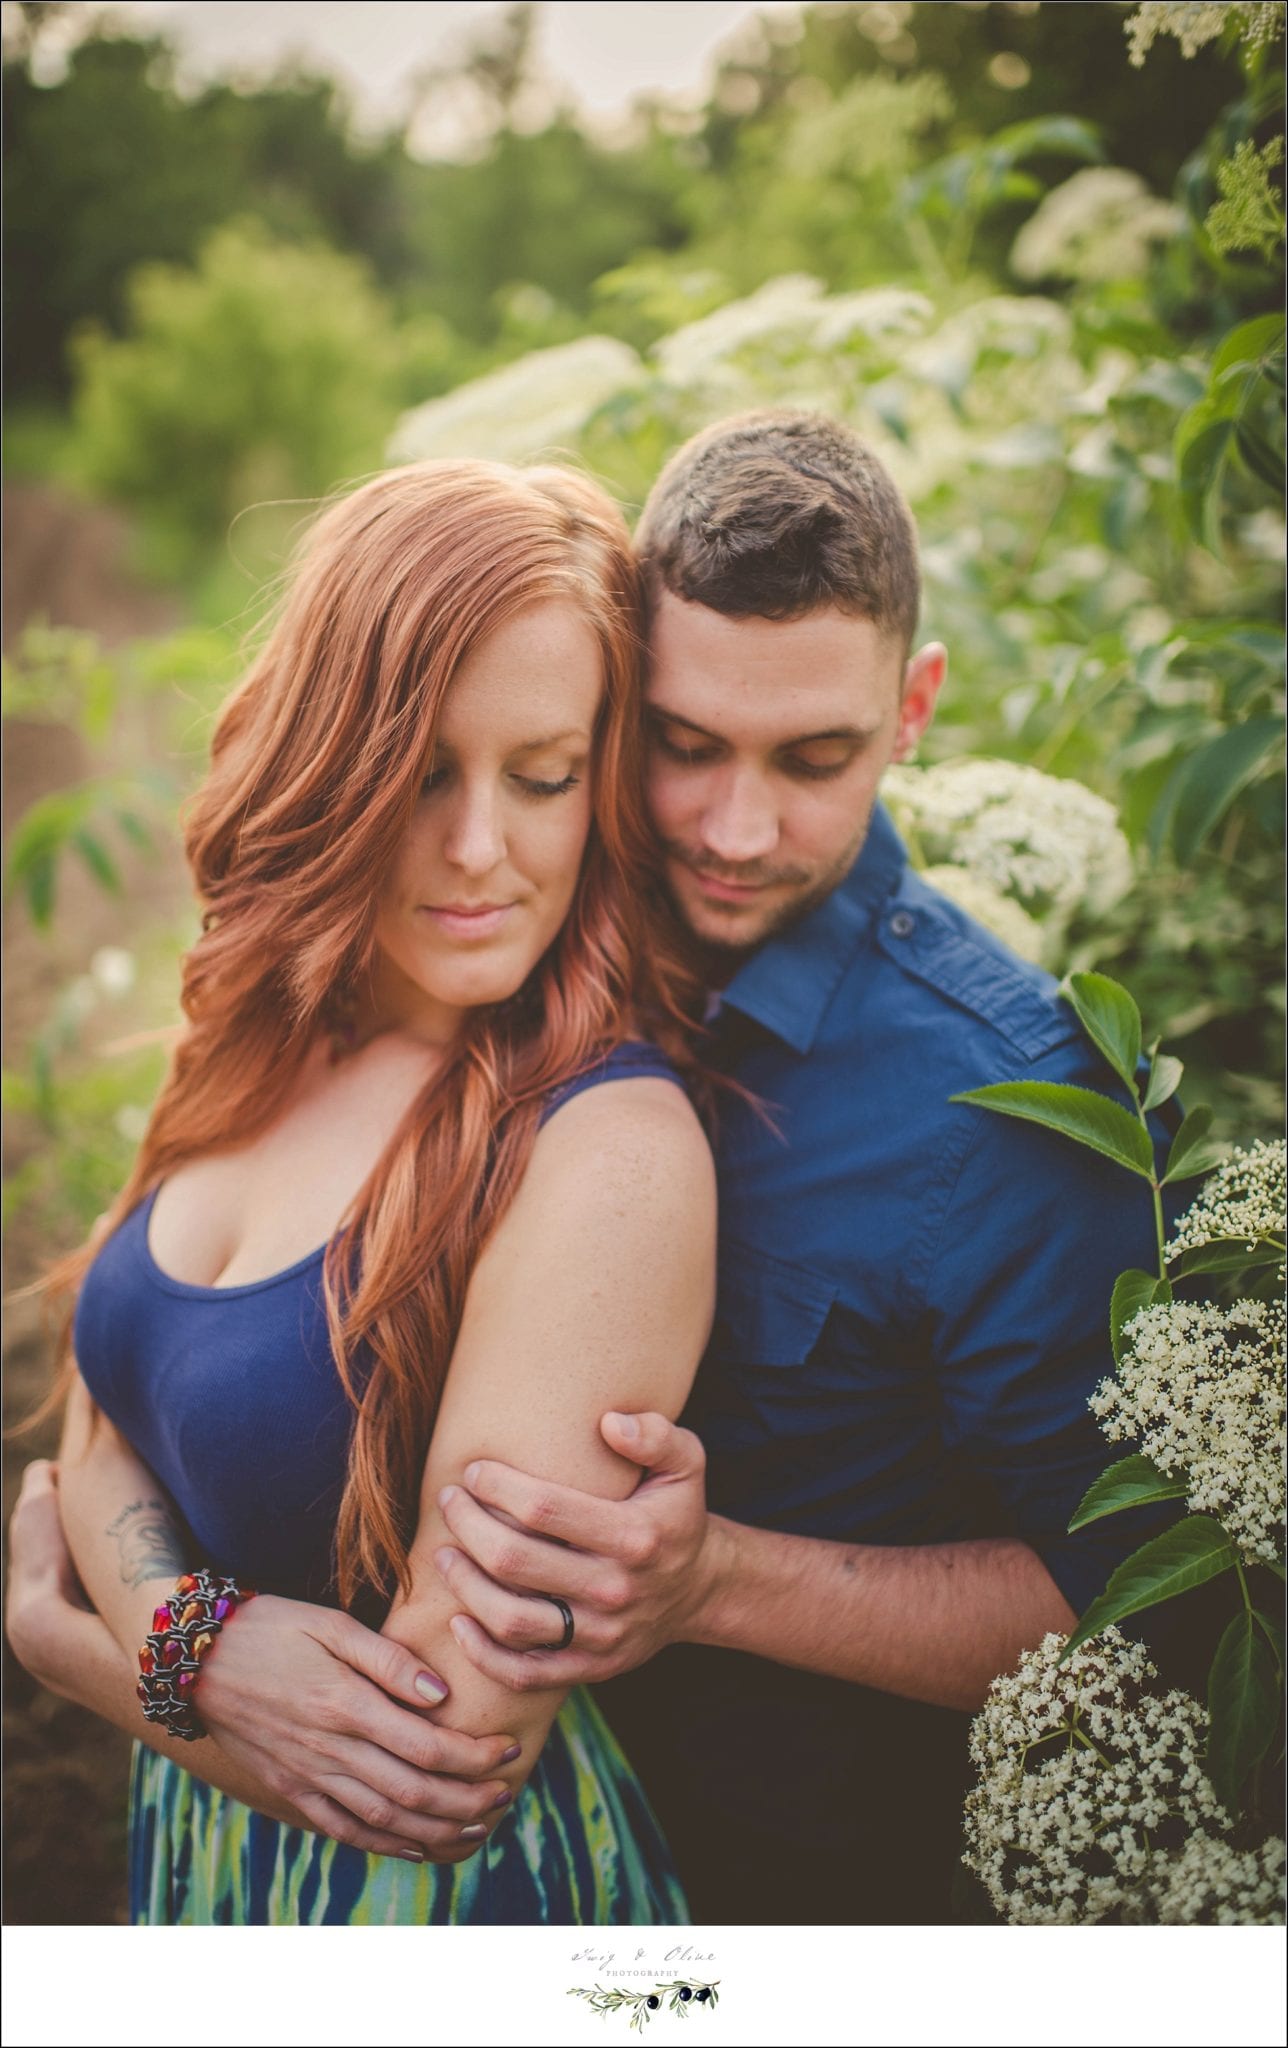 engagement sessions, happy couples, gorgeous couples, outdoor sessions, rustic, vintage, rock star status, Twig and Olive photography.